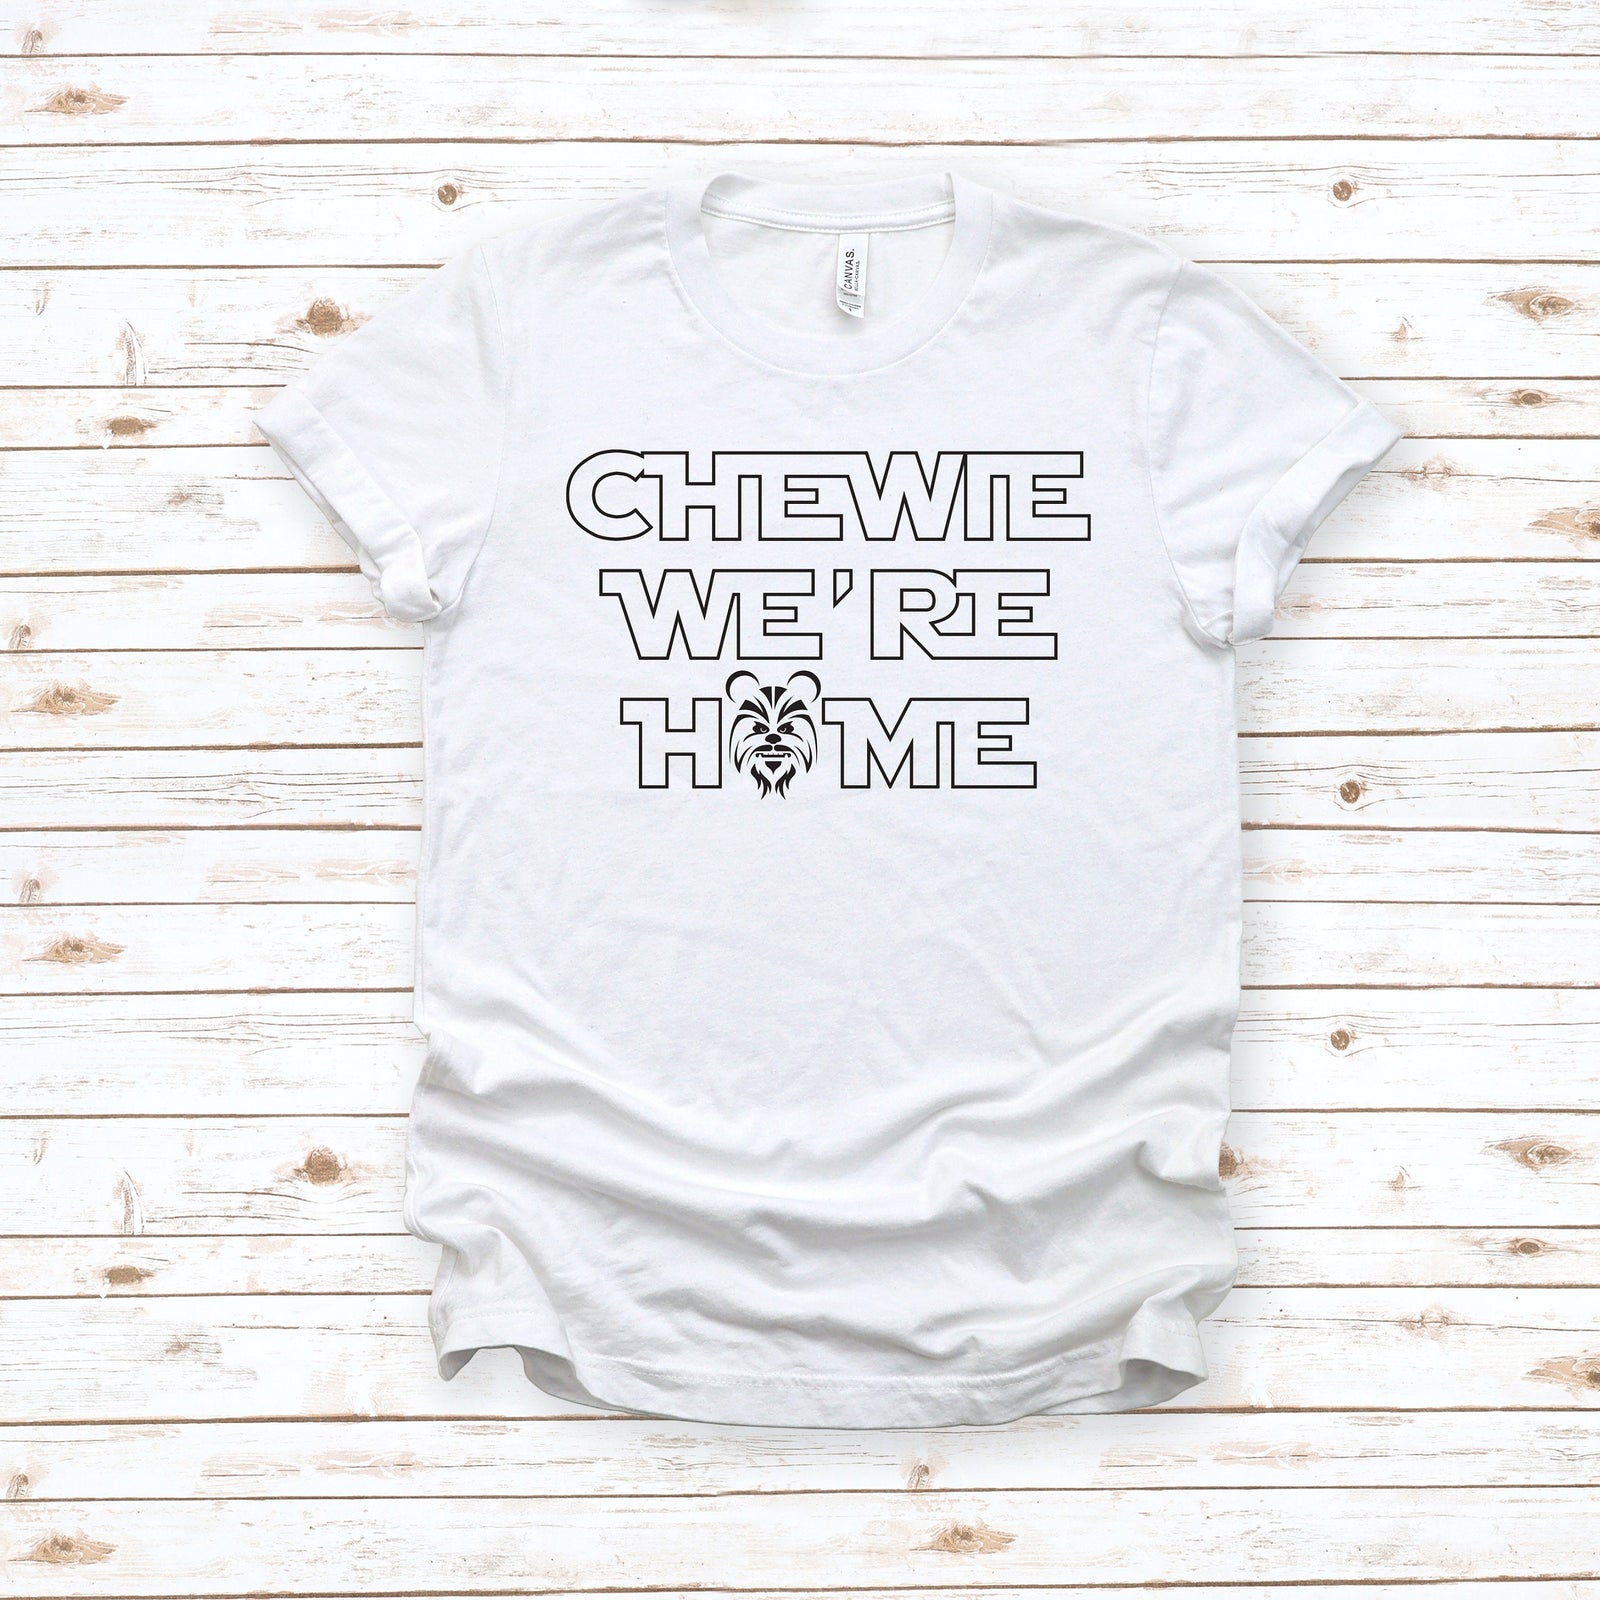 Chewie We Are Home -Darth Vader T Shirt - Disney Star Wars T-shirt - Star Wars Gift Idea - Star Wars Lover T Shirt